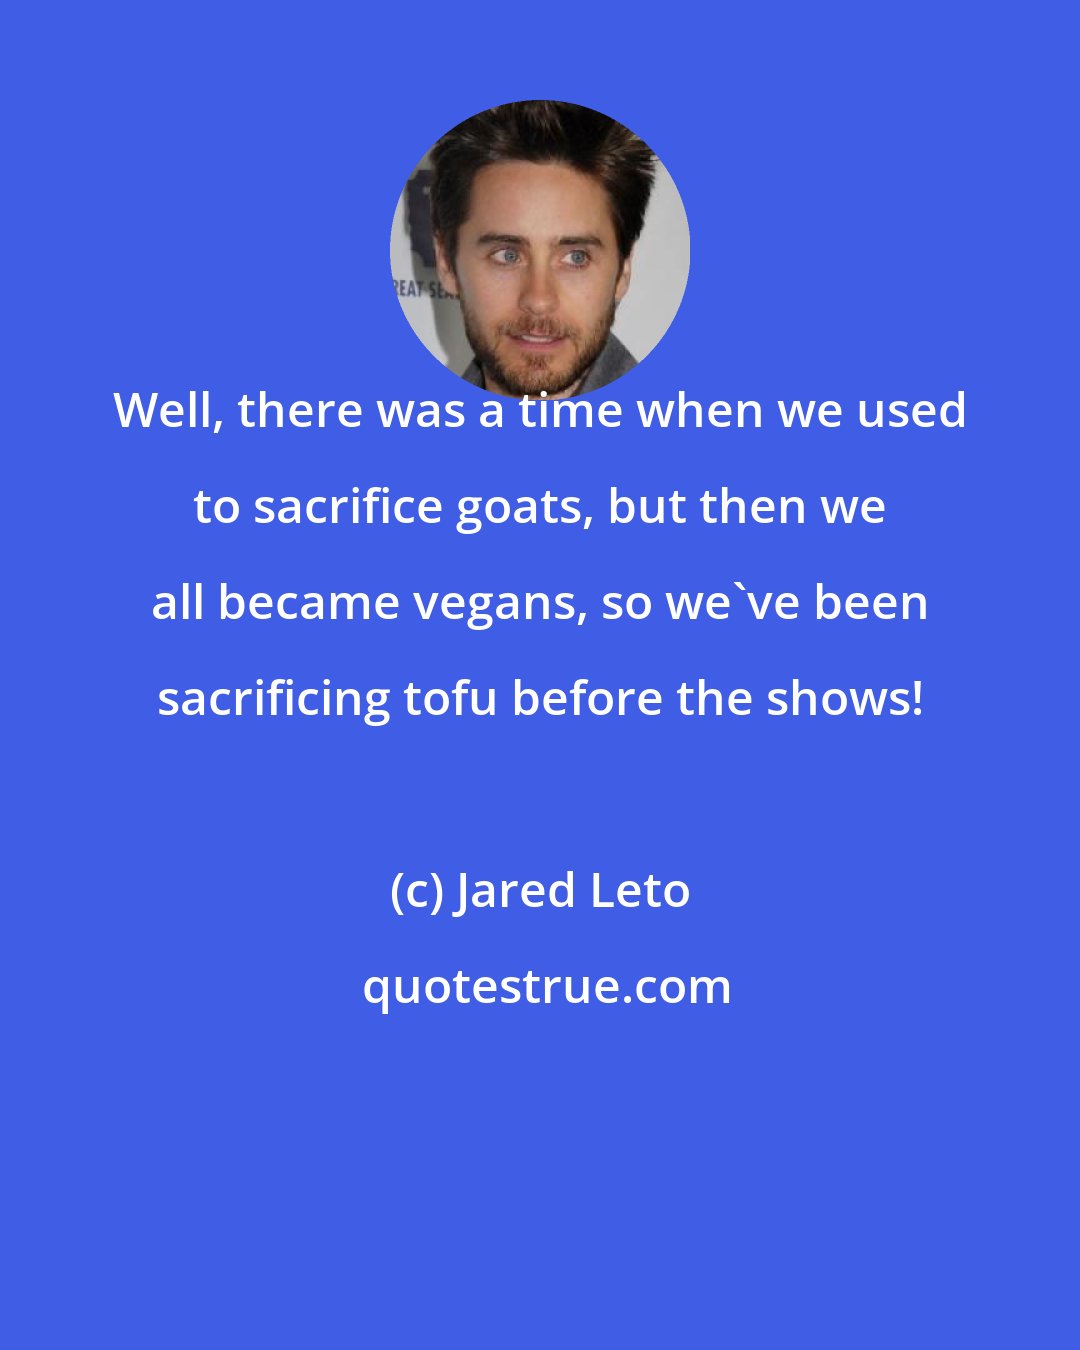 Jared Leto: Well, there was a time when we used to sacrifice goats, but then we all became vegans, so we've been sacrificing tofu before the shows!